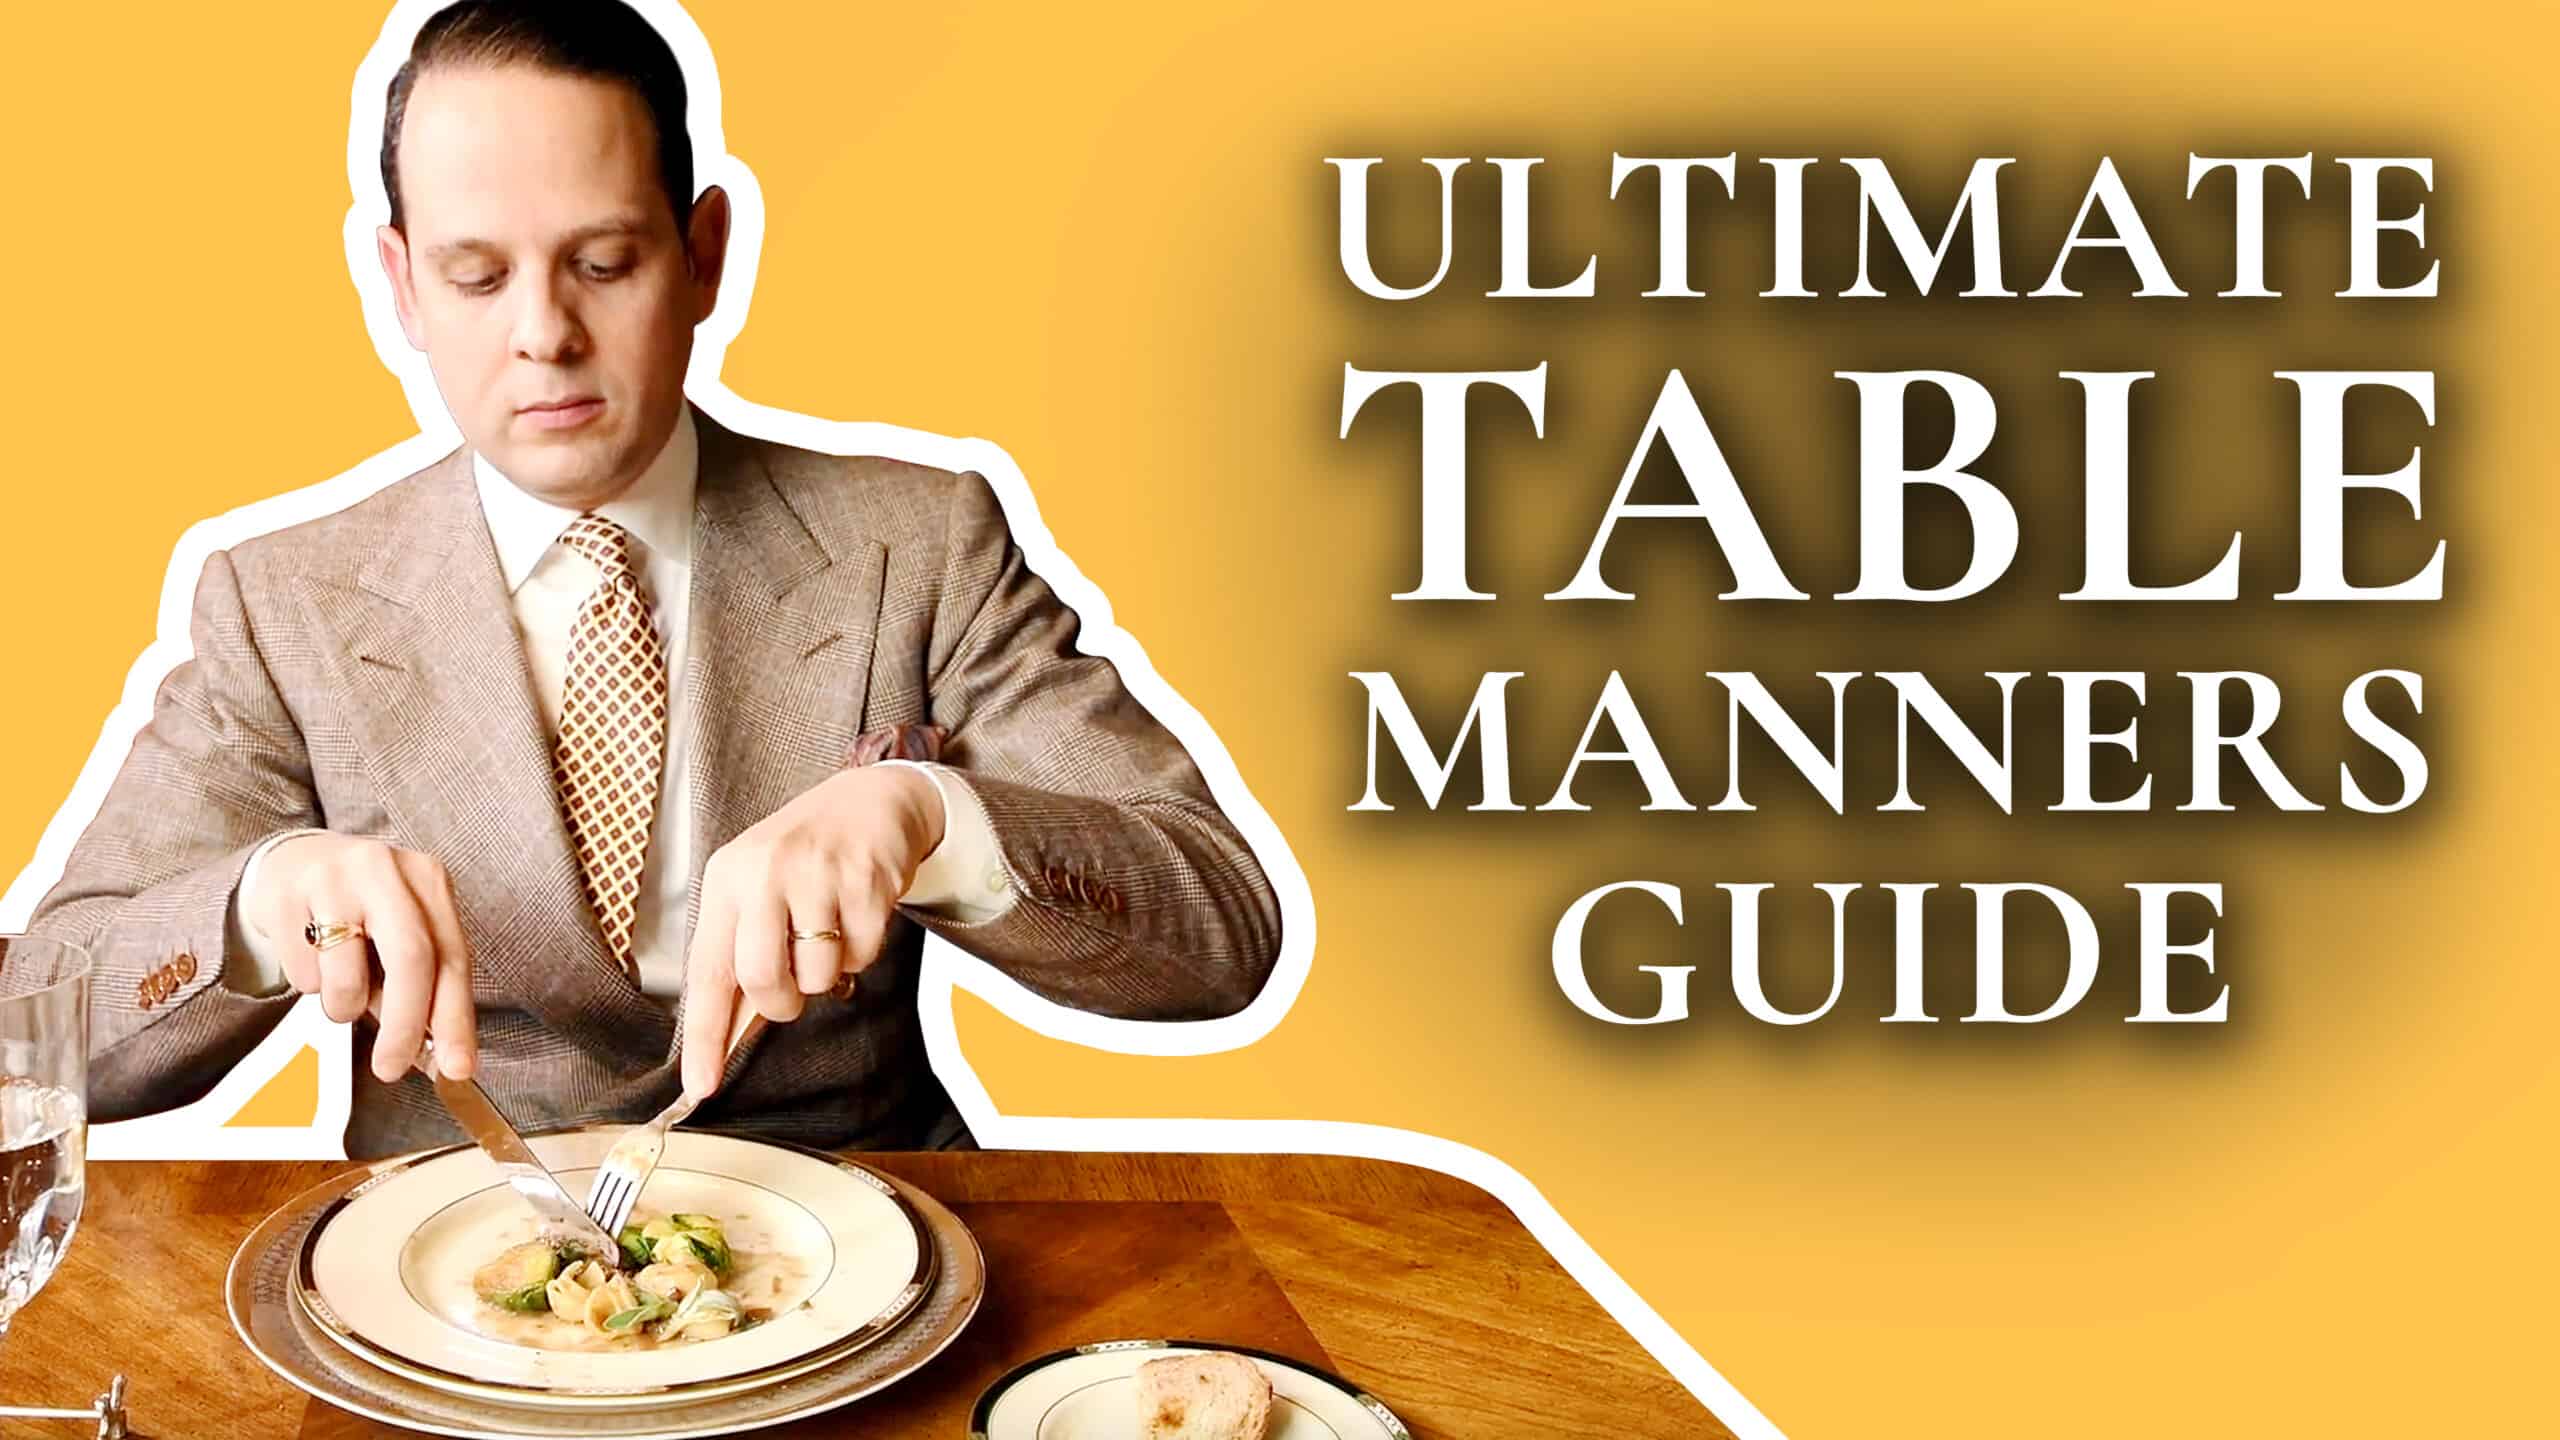 https://www.gentlemansgazette.com/wp-content/uploads/2018/02/table-manners_3840x2160_wp-scaled.jpg